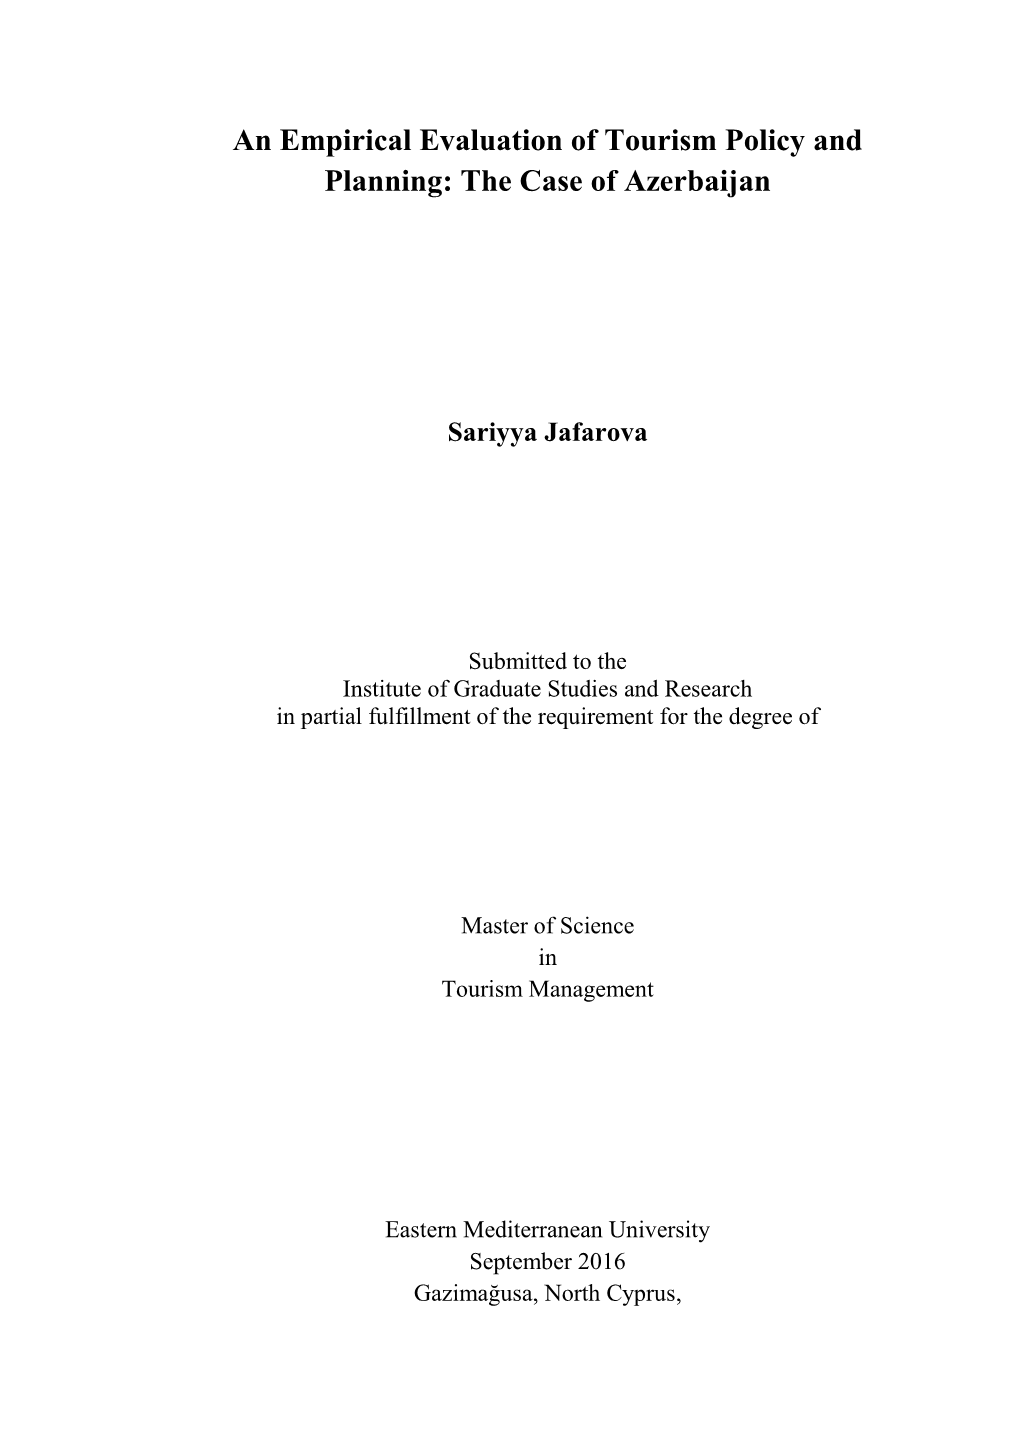 An Empirical Evaluation of Tourism Policy and Planning: the Case of Azerbaijan